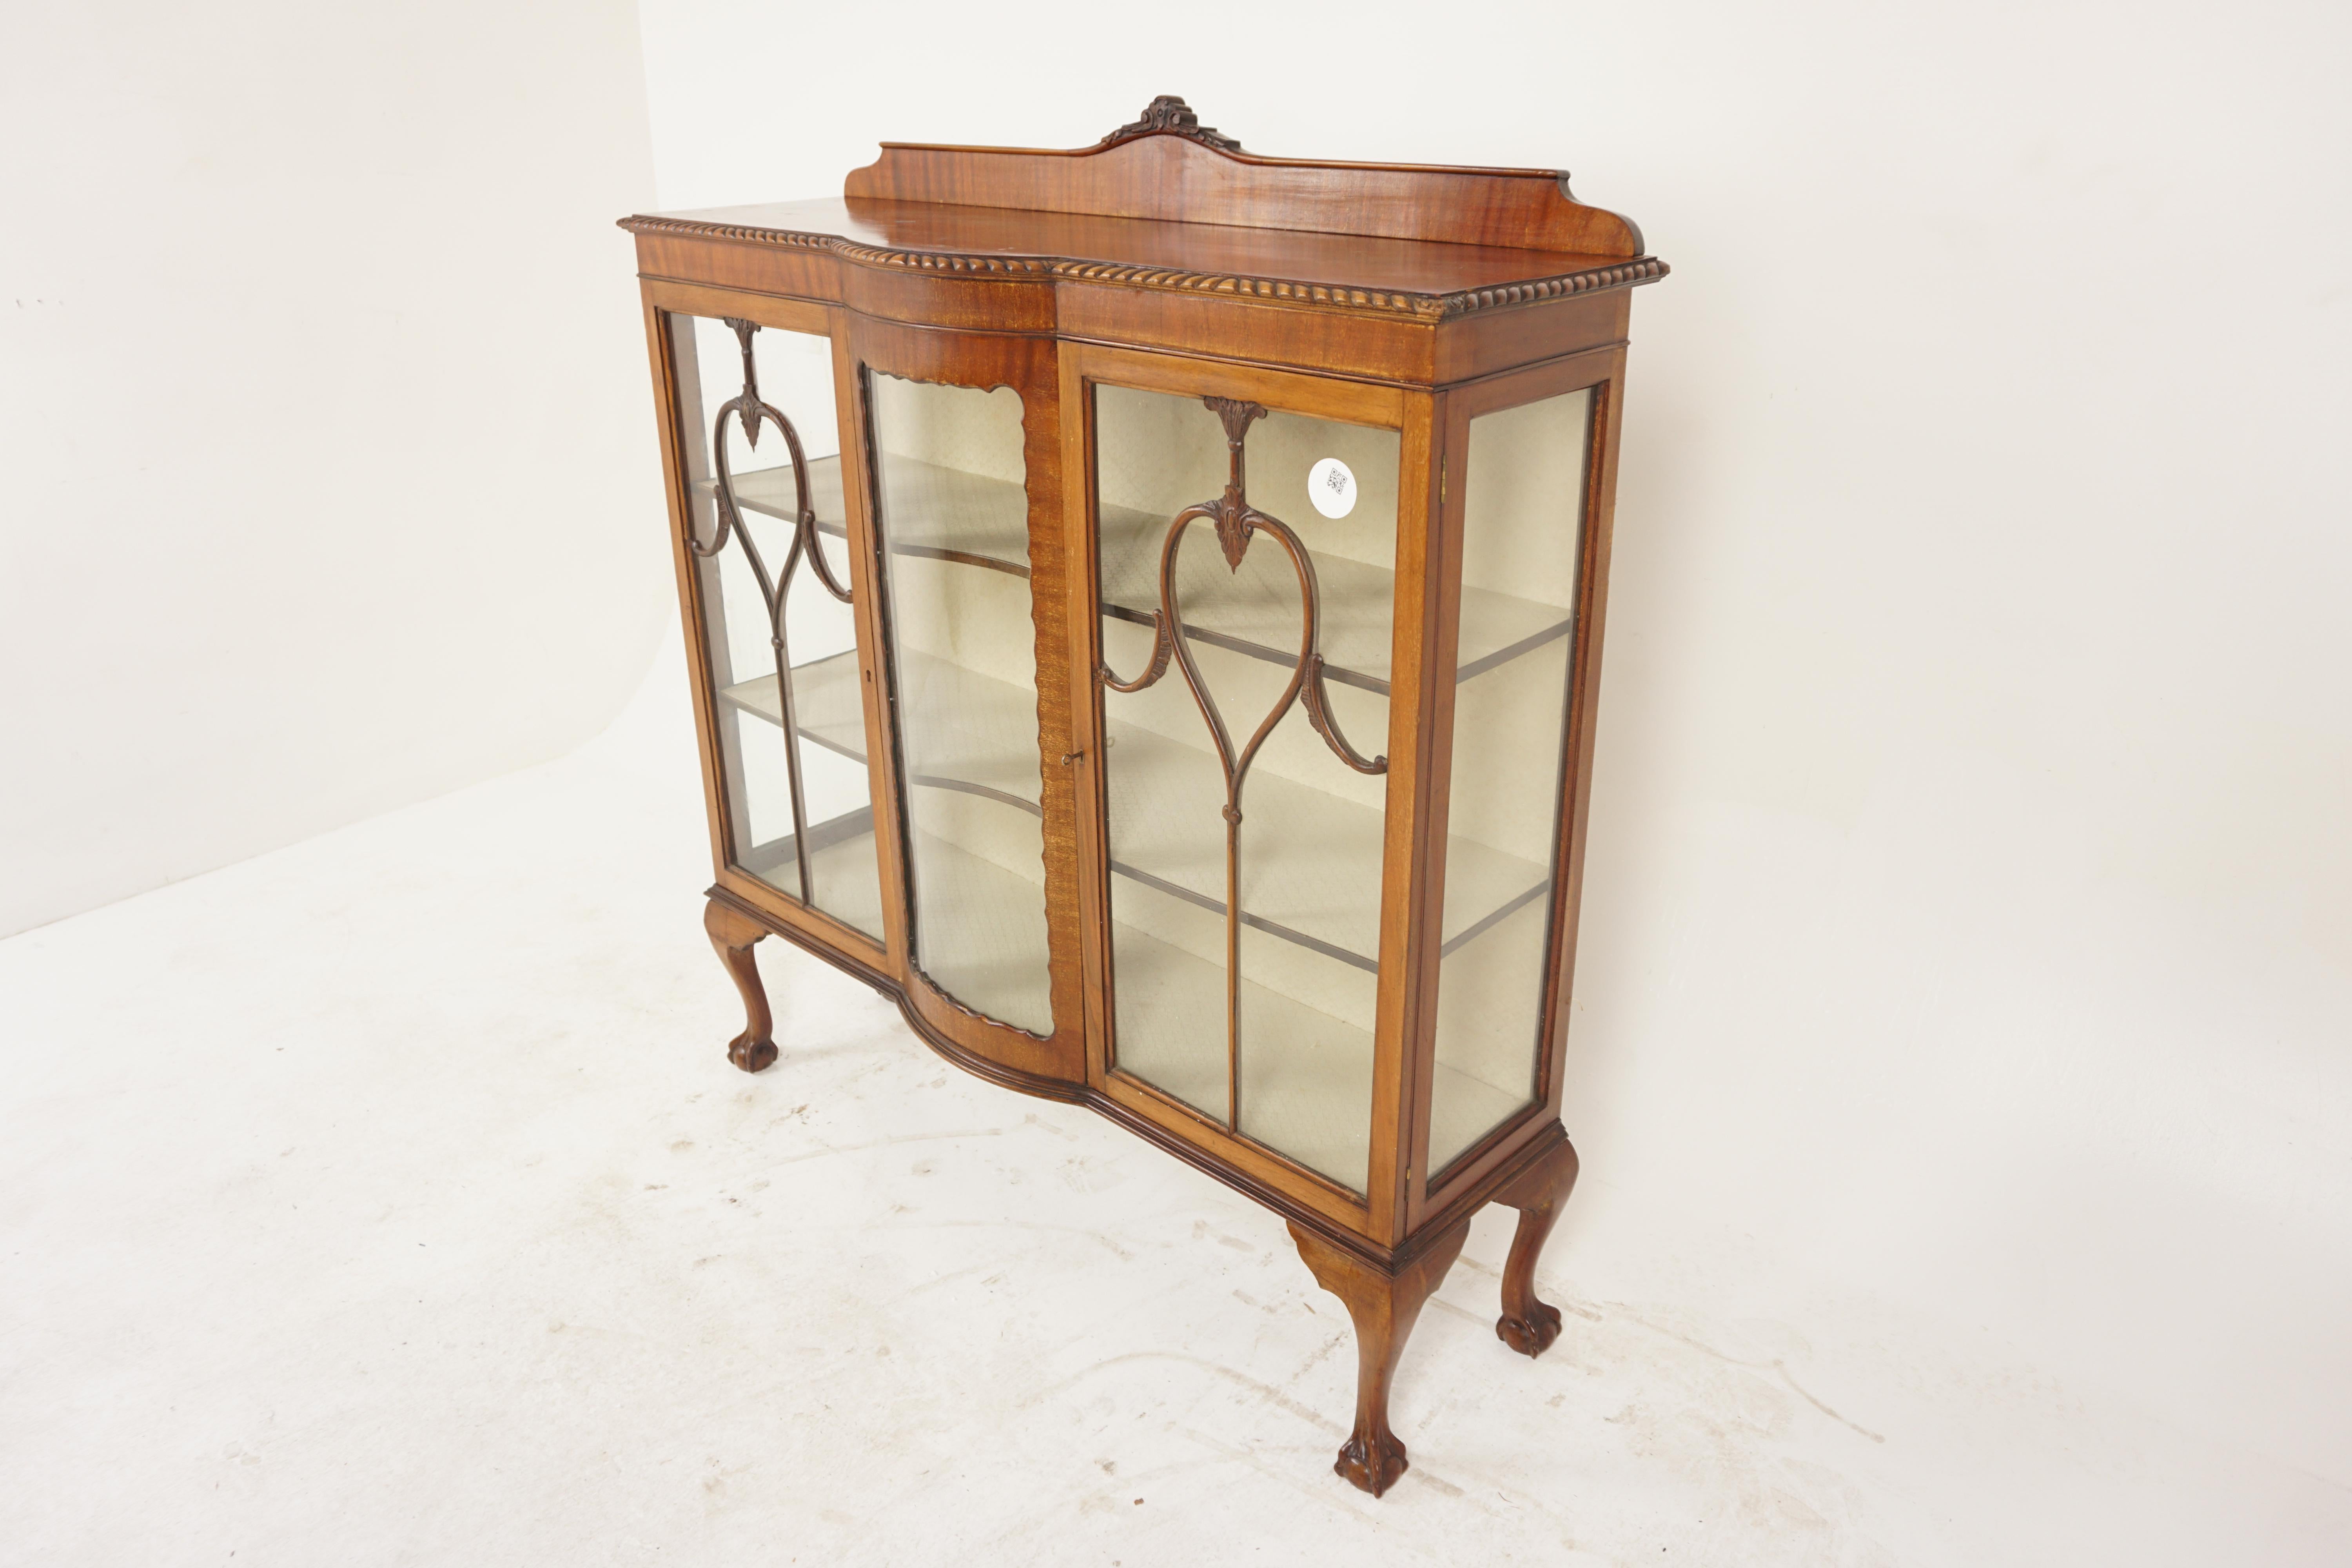 Antique Walnut China Cabinet, Display Shelves, Scotland 1910, H1011

Solid Walnut
Original finish
Pediment on top
Slight bow front with rope edging
Single bow front original glass door
With wonderful shaped moulding on front
Opens to reveal pair of